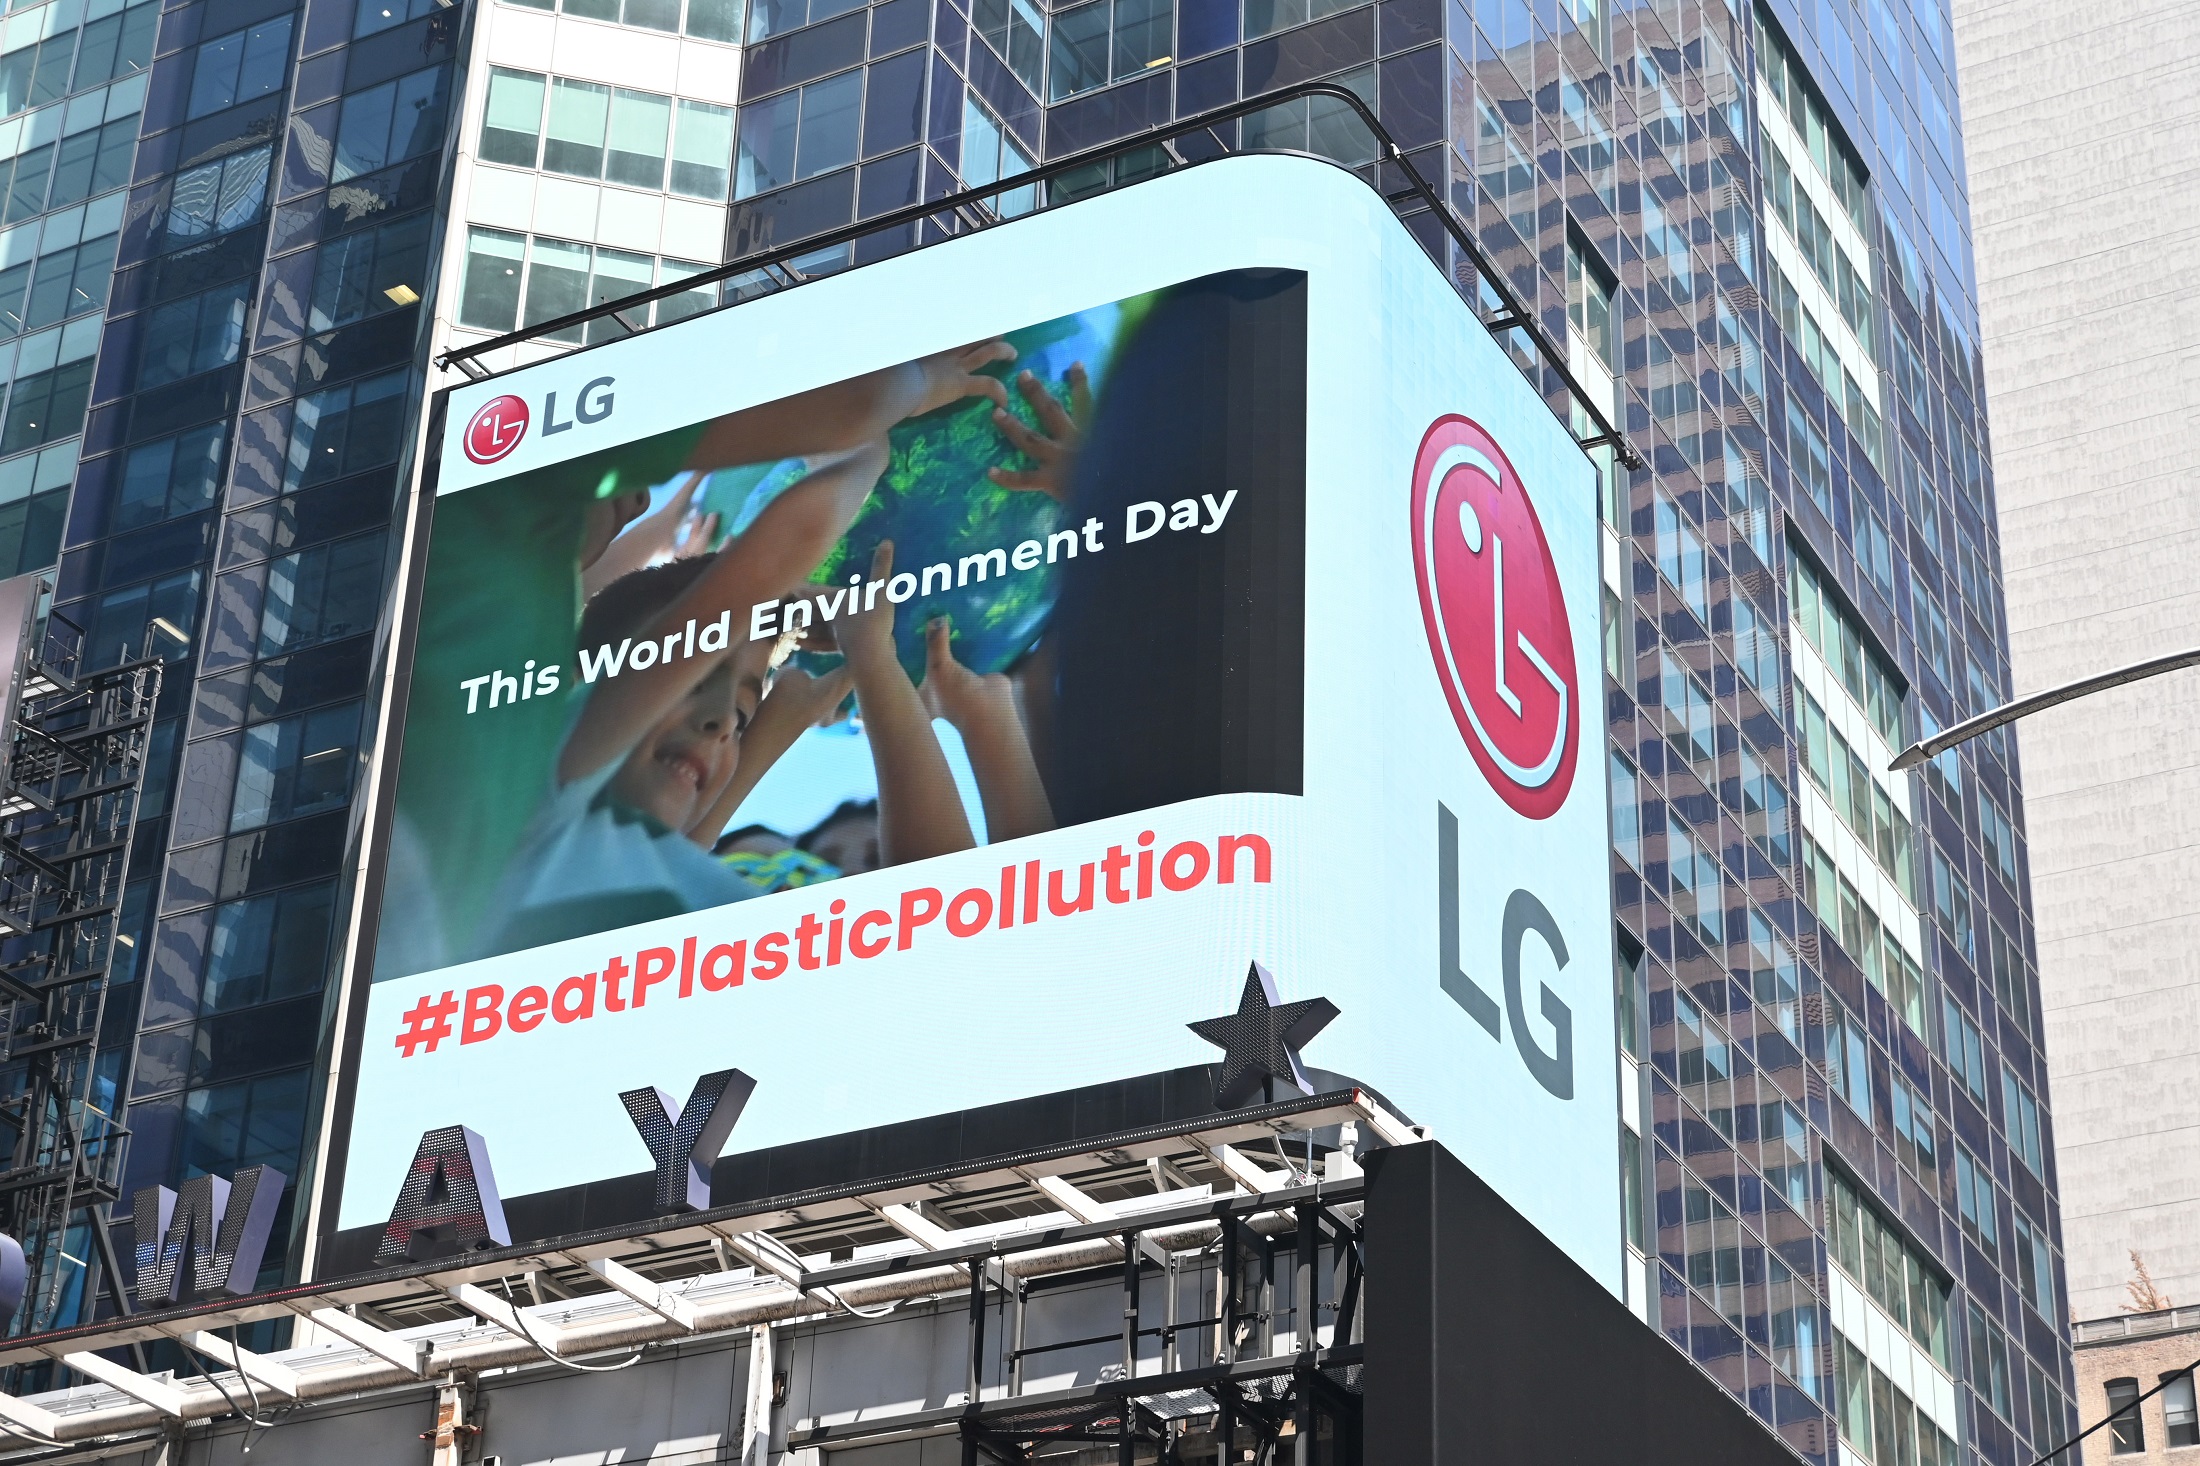 A video highlighting LG's commitment to convert to 100 percent renewable energy displayed on a digital billboard at New York's Times Square